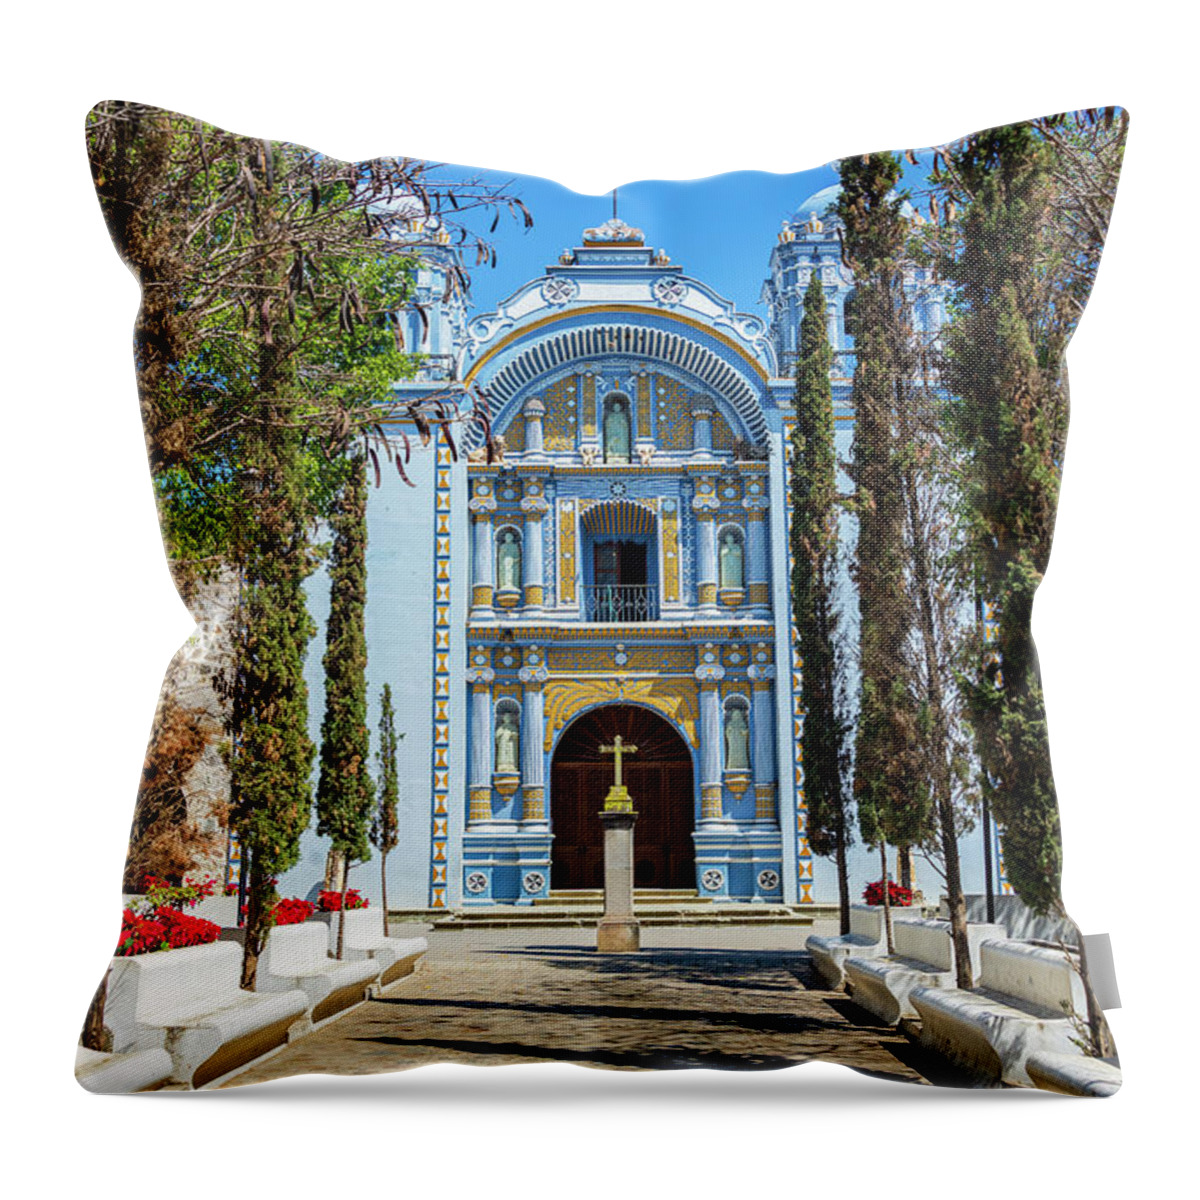 Mexico Throw Pillow featuring the photograph Beautiful Blue Church by Jess Kraft